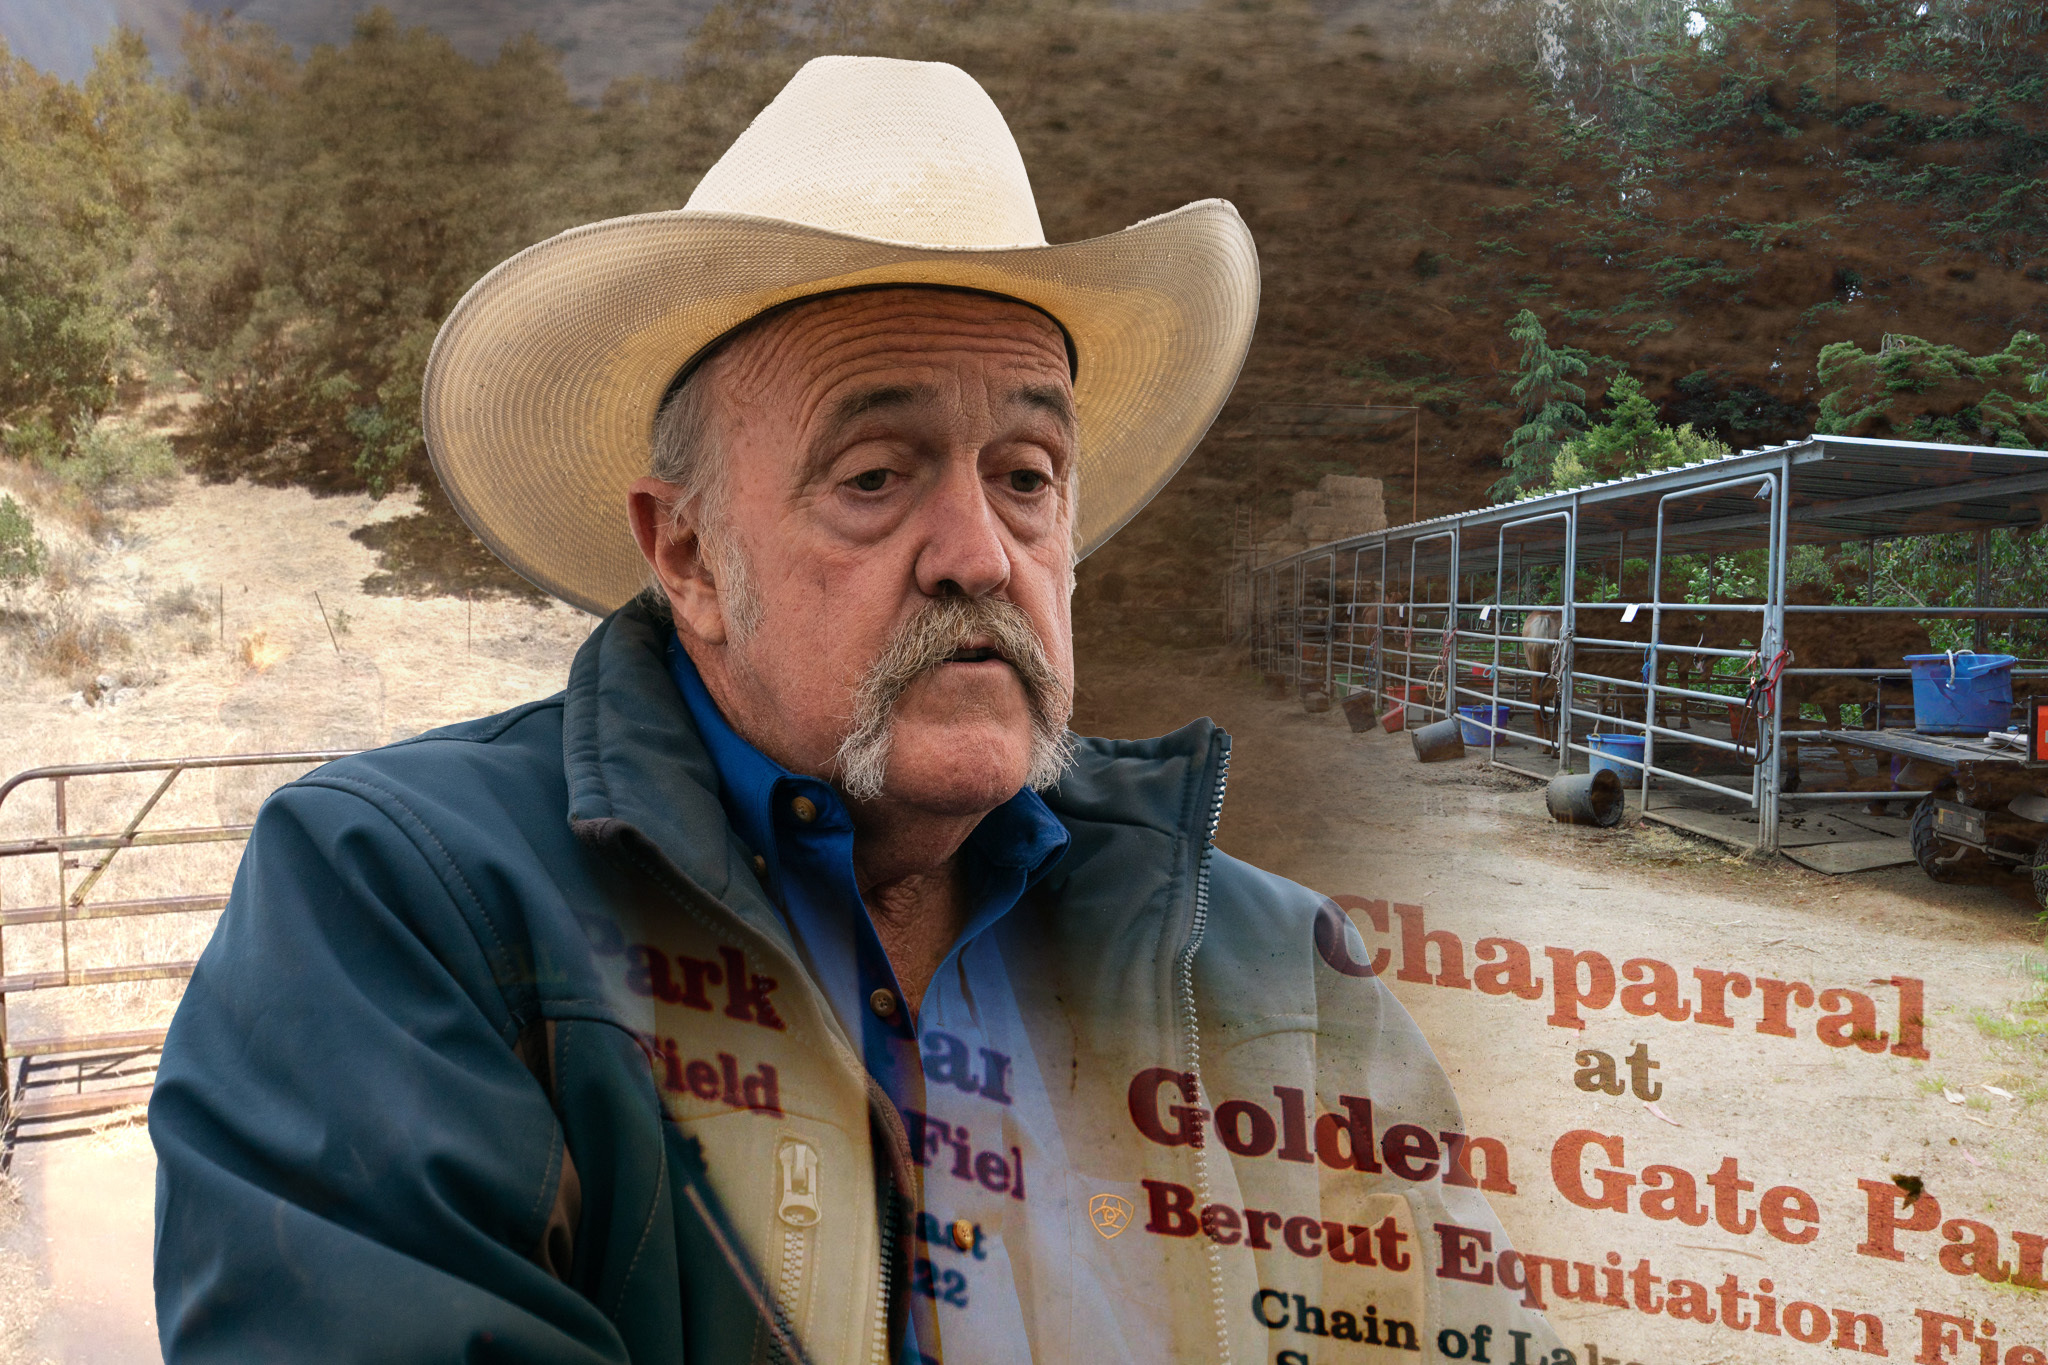 The image features an older man wearing a cowboy hat and a blue jacket, superimposed over scenes of a rustic outdoor setting and a sign that reads "Chaparral at Golden Gate Park."